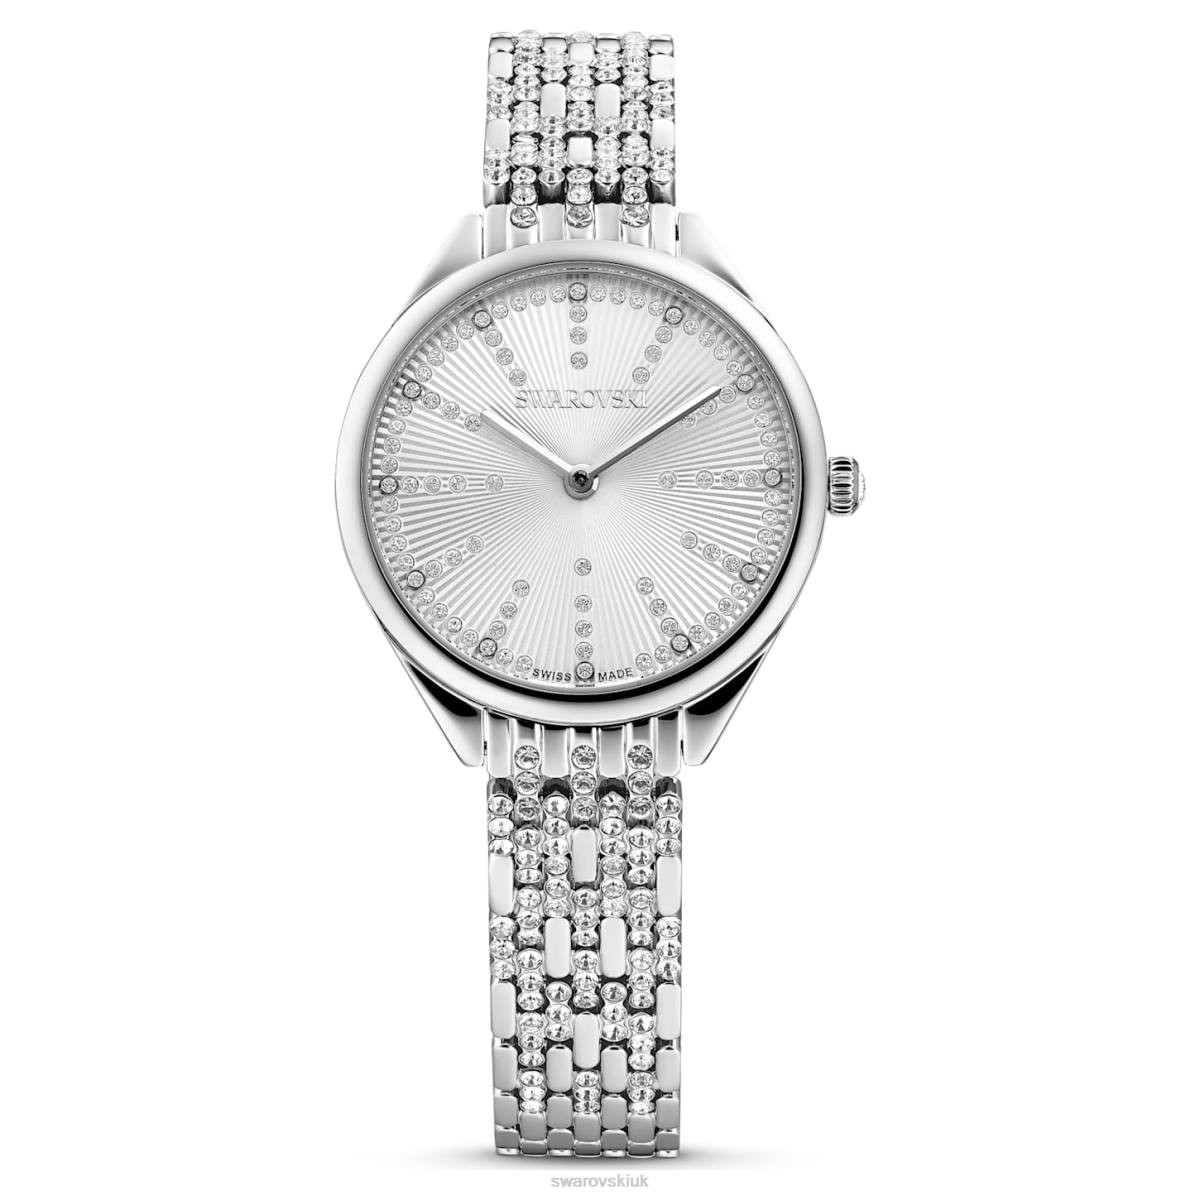 Accessories Swarovski Attract watch Swiss Made, Pave, Metal bracelet, Silver tone, Stainless steel 48JX1224